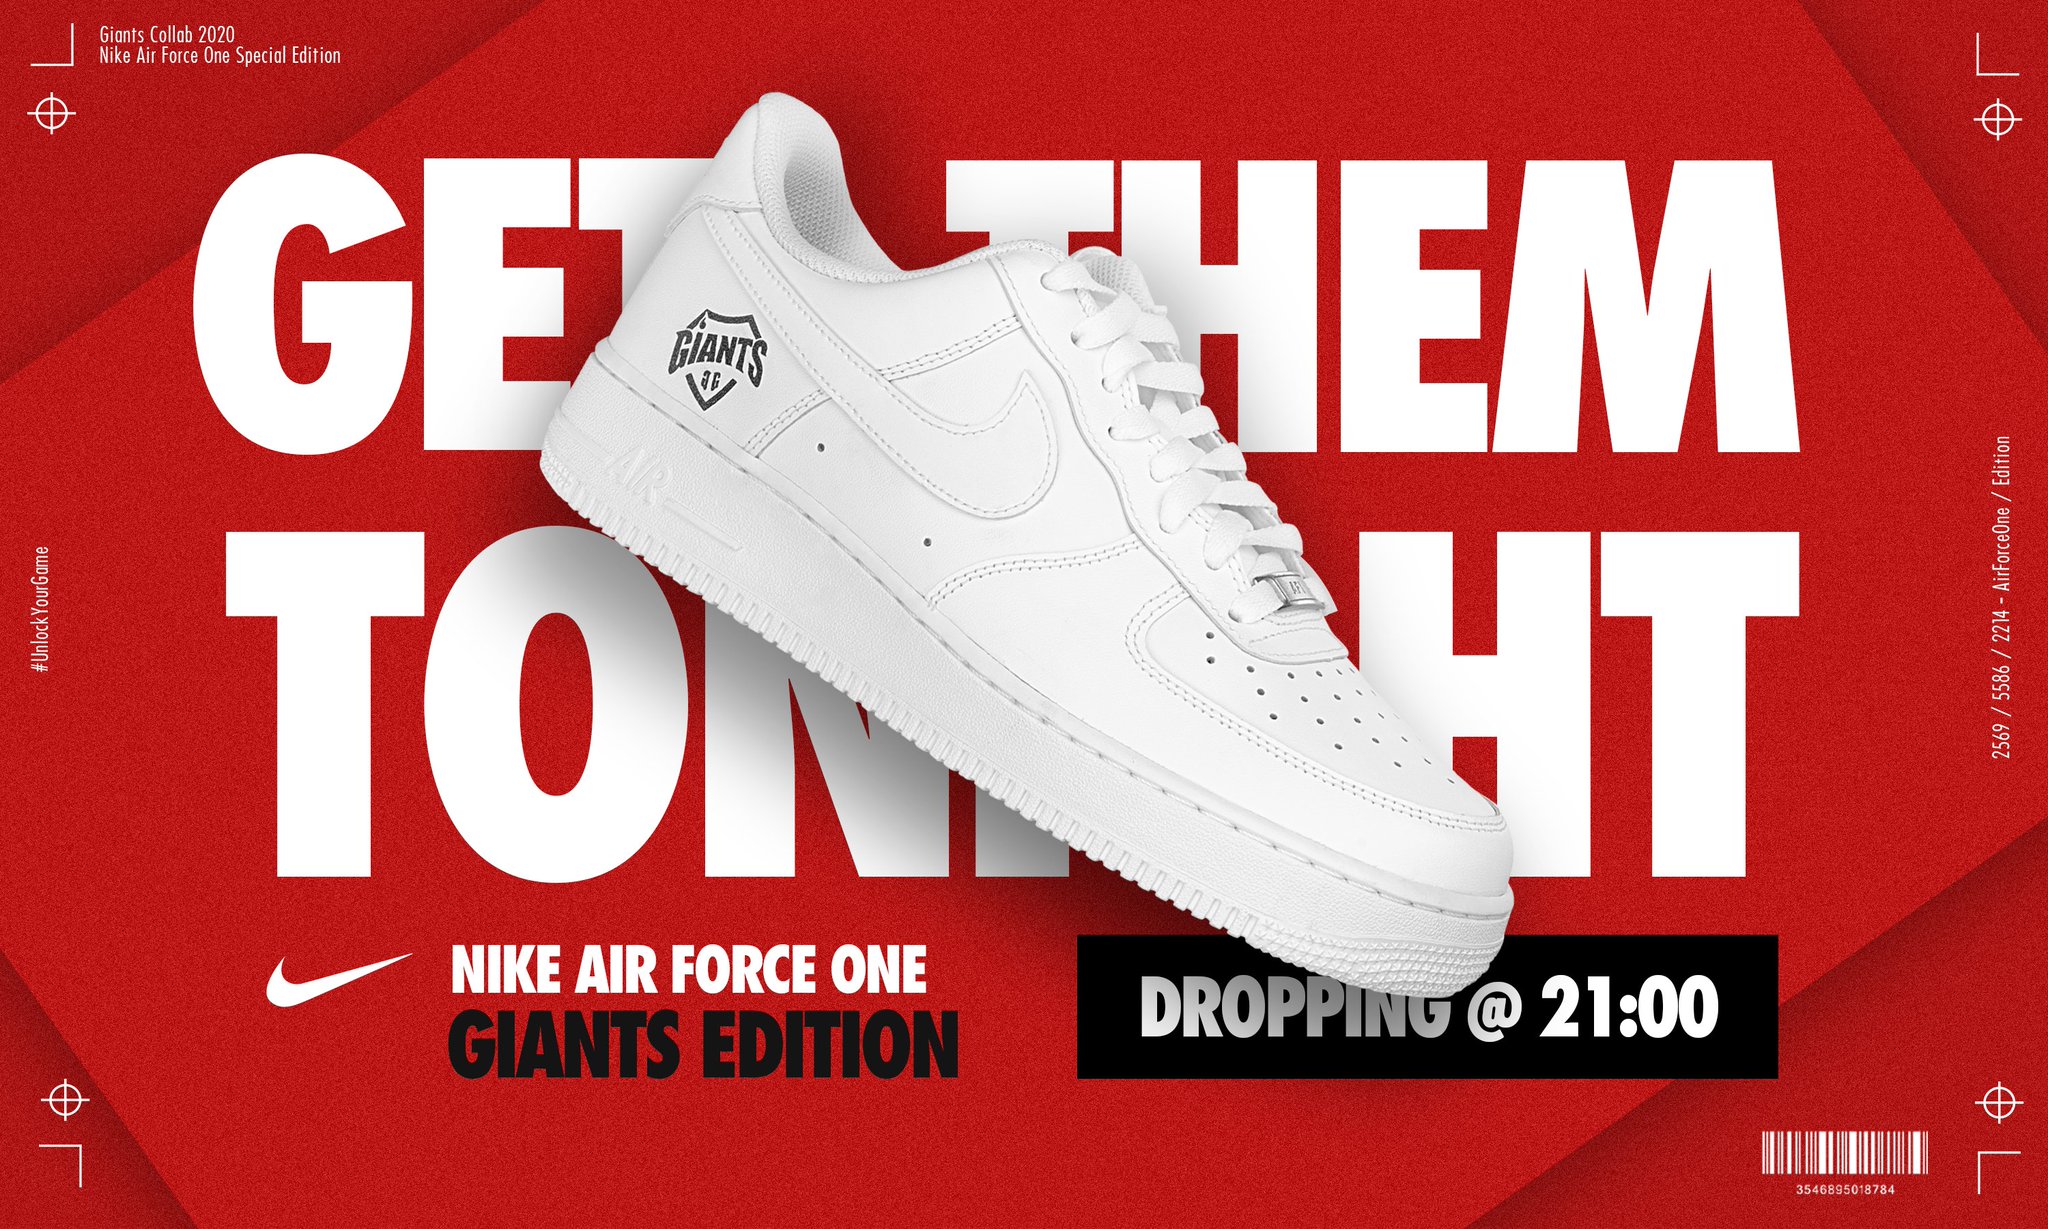 Giants on Twitter: "Nike Air Force One Giants Edition Unidades limitadas | 09/03 - 21:00 | #UnlockYourGame ➡️ https://t.co/Q9hcp2RqTm https://t.co/BGAXta5TVc" Twitter